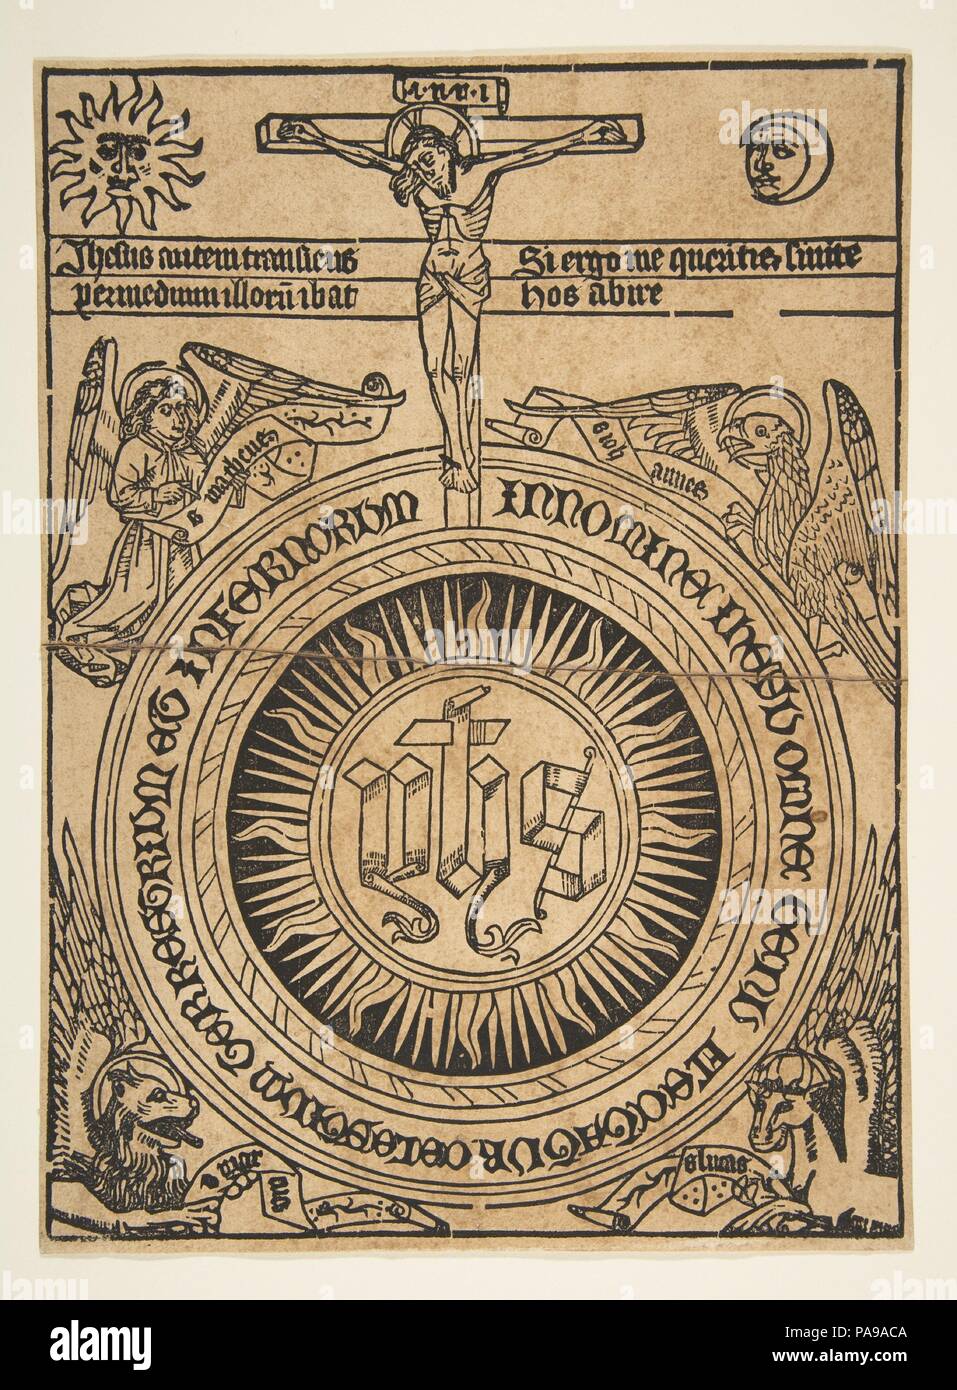 The Sacred Monogram with the Symbols of the Evangelists and the Crucifixion (Schr. 1812). Artist: Anonymous, German, 15th century. Dimensions: sheet: 10 5/16 x 7 11/16 in. (26.2 x 19.6 cm). Date: 15th century. Museum: Metropolitan Museum of Art, New York, USA. Stock Photo